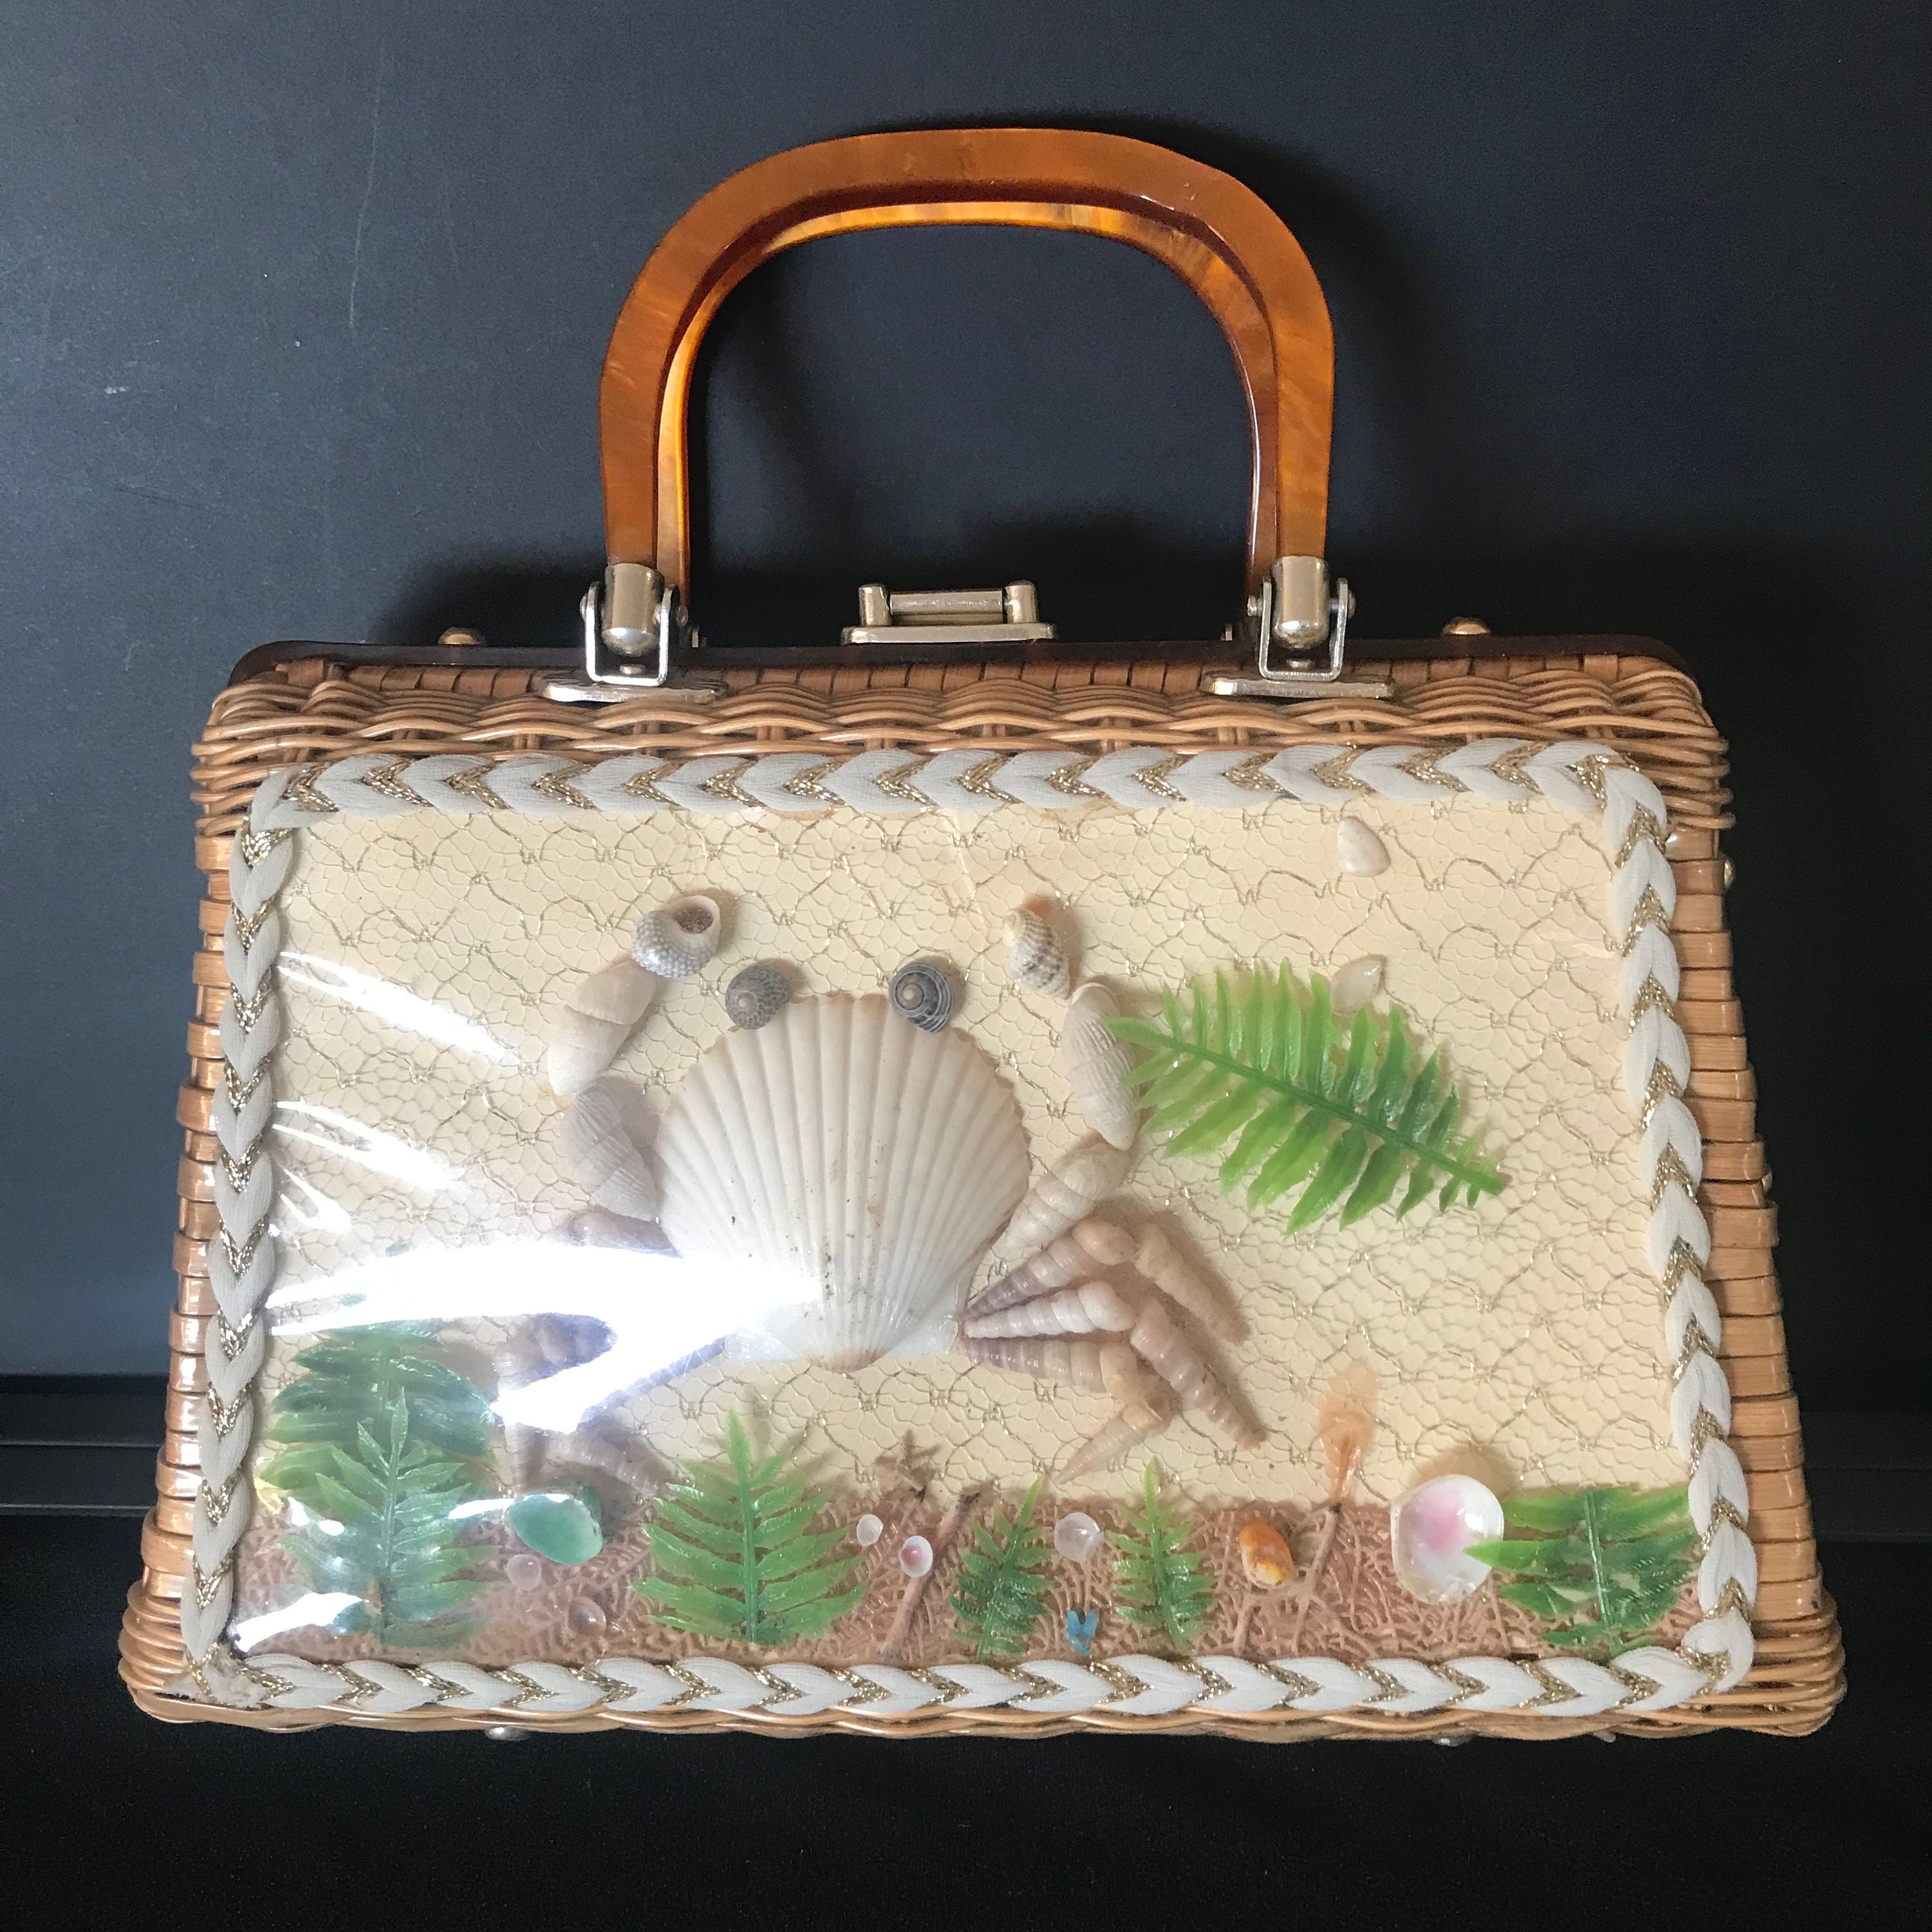 VINTAGE WICKER PURSE HAND MADE IN HONG KONG ANTIQUE PURSE